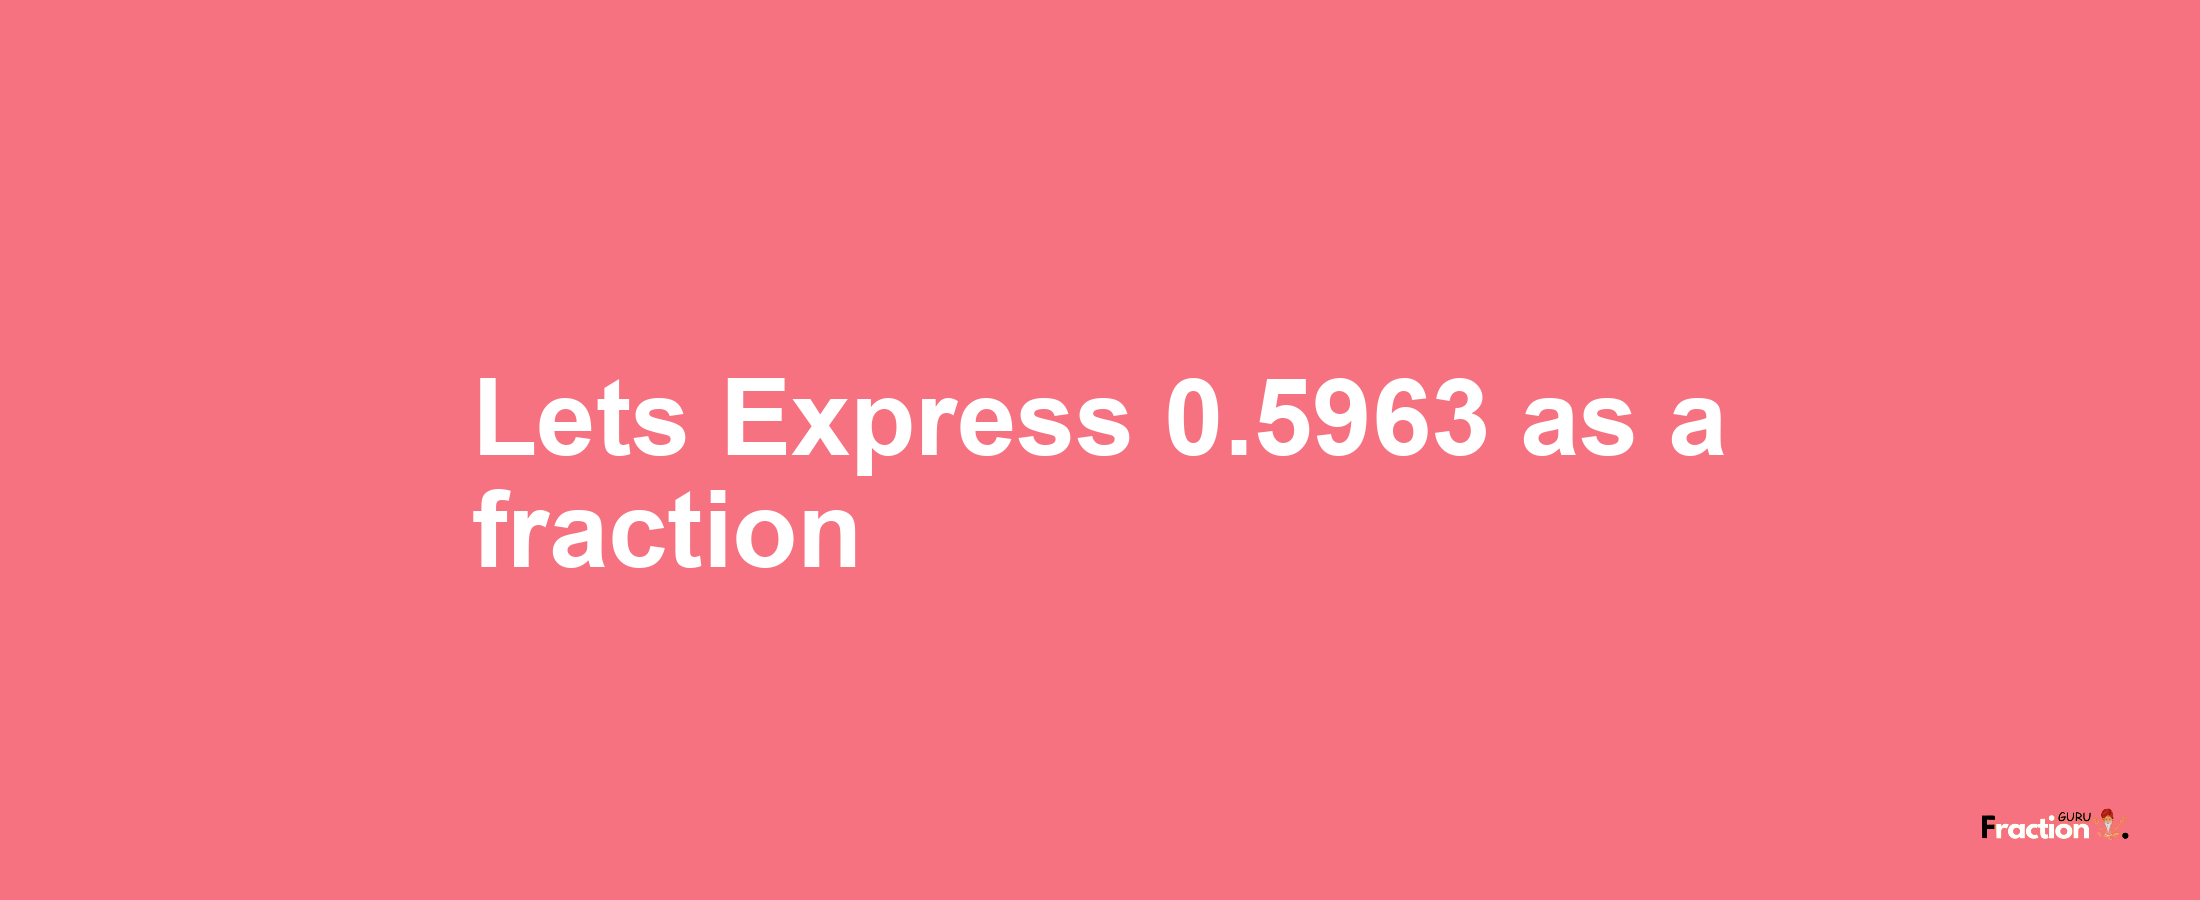 Lets Express 0.5963 as afraction